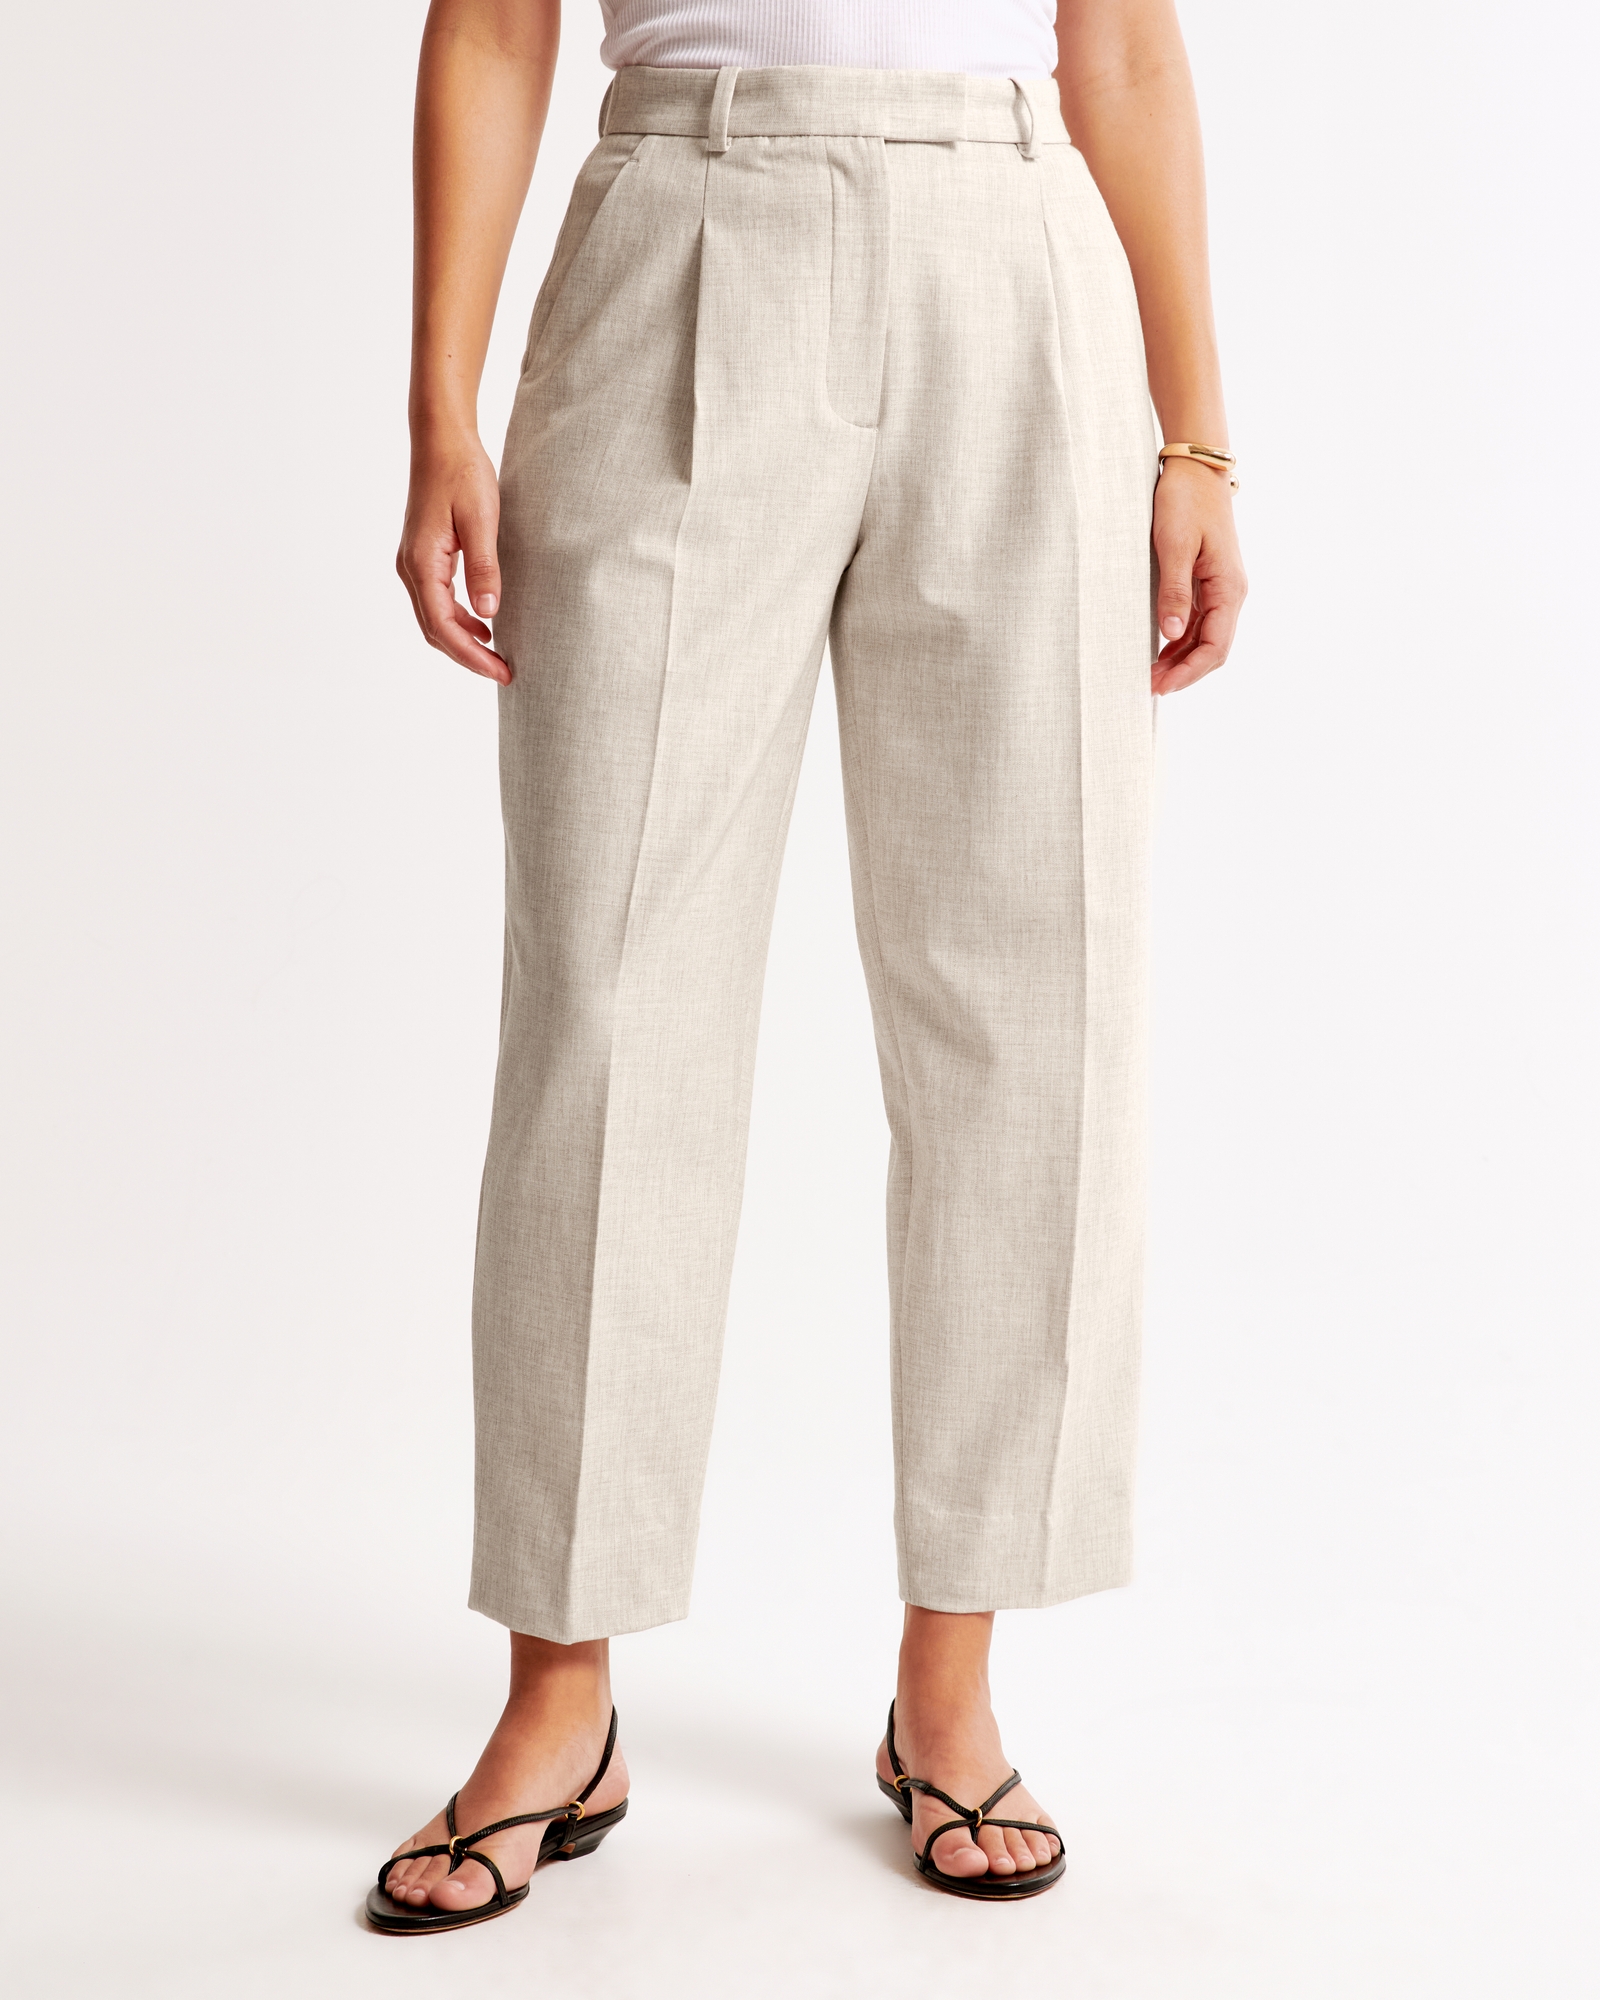 Curve Love Ankle Grazing Tapered Tailored Pant